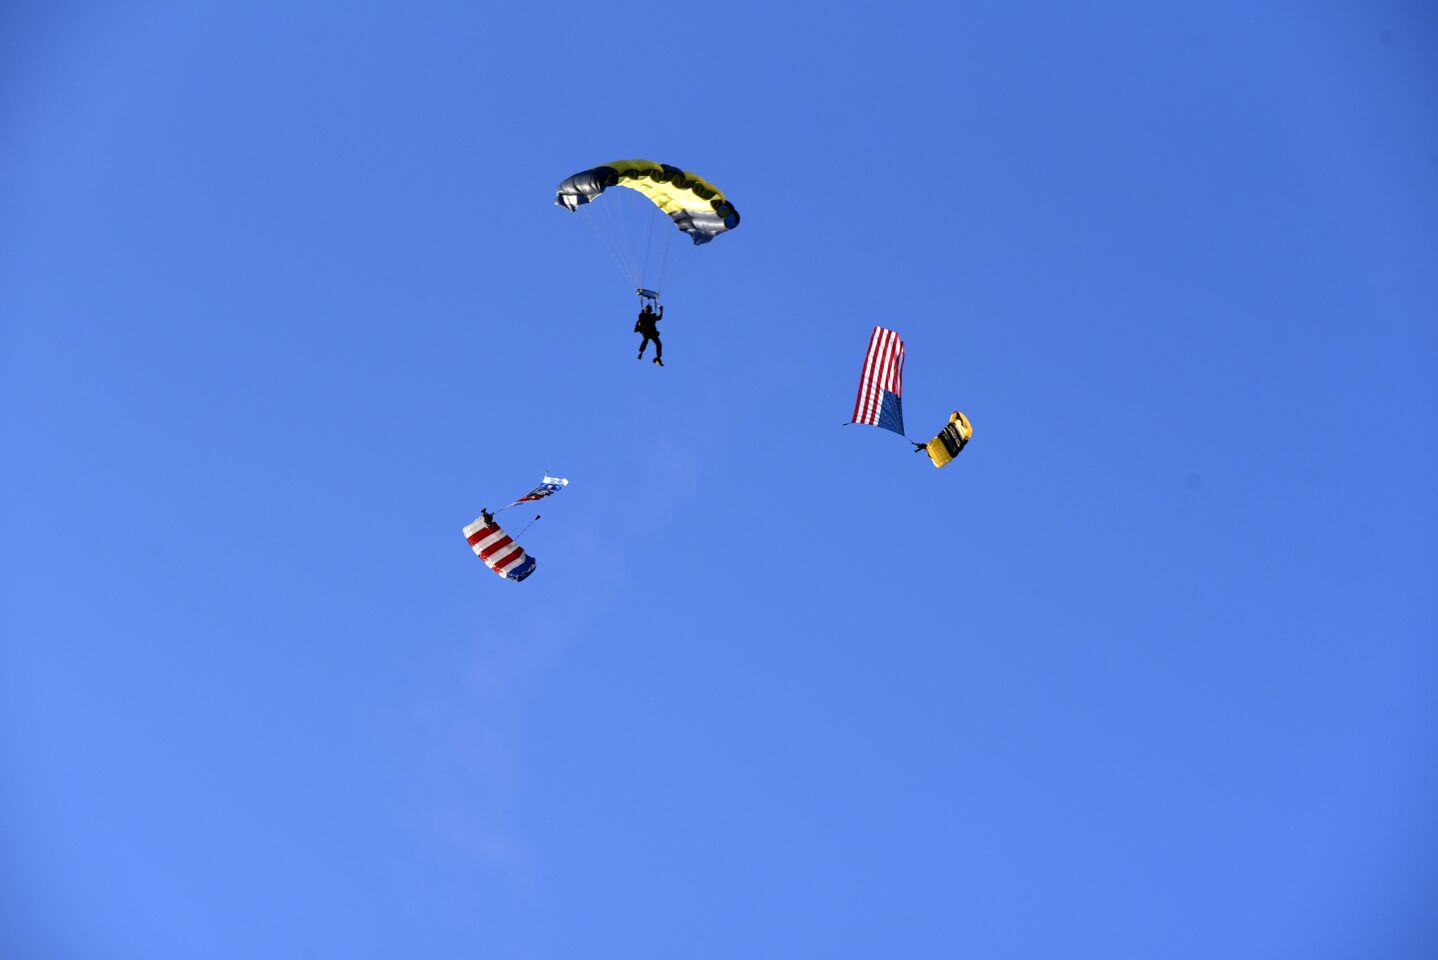 Guests were treated to a skydiving exhibition